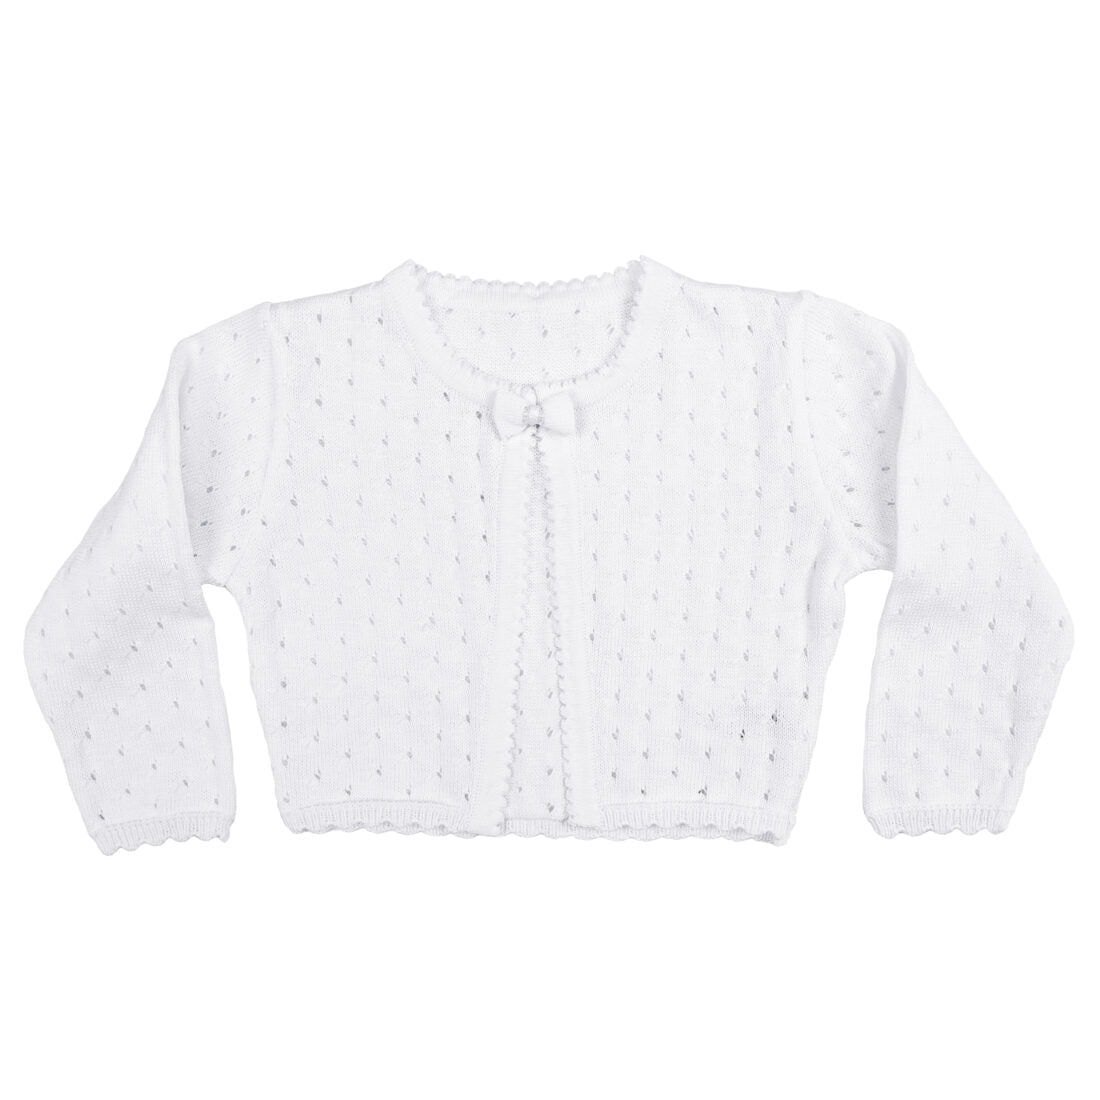 Girls White 100% Cotton Sweater with Tear Drop Pattern and Scalloped Trim - LTMAL-CKGRLS1